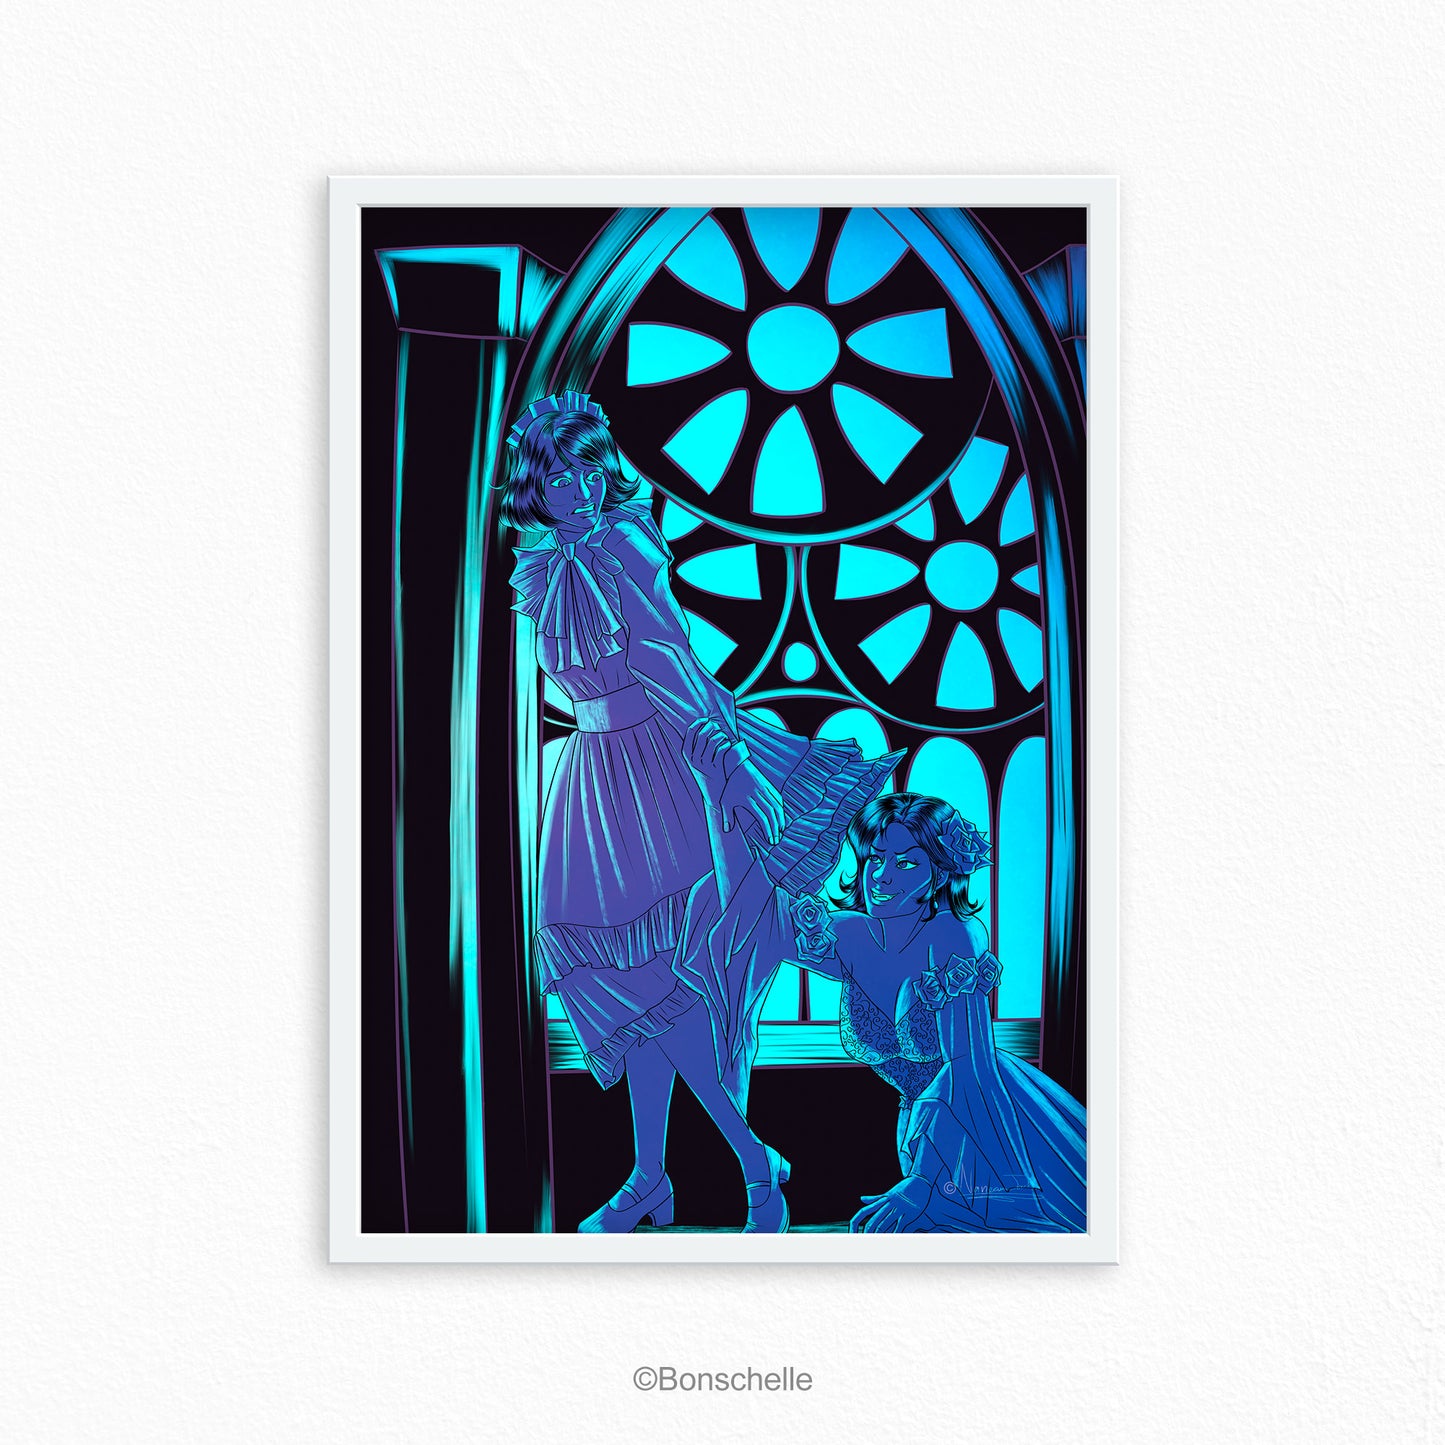 The Vampire's Grasp, Neon Gothic Digital Art Poster Prin shwon framed hanging on a wall